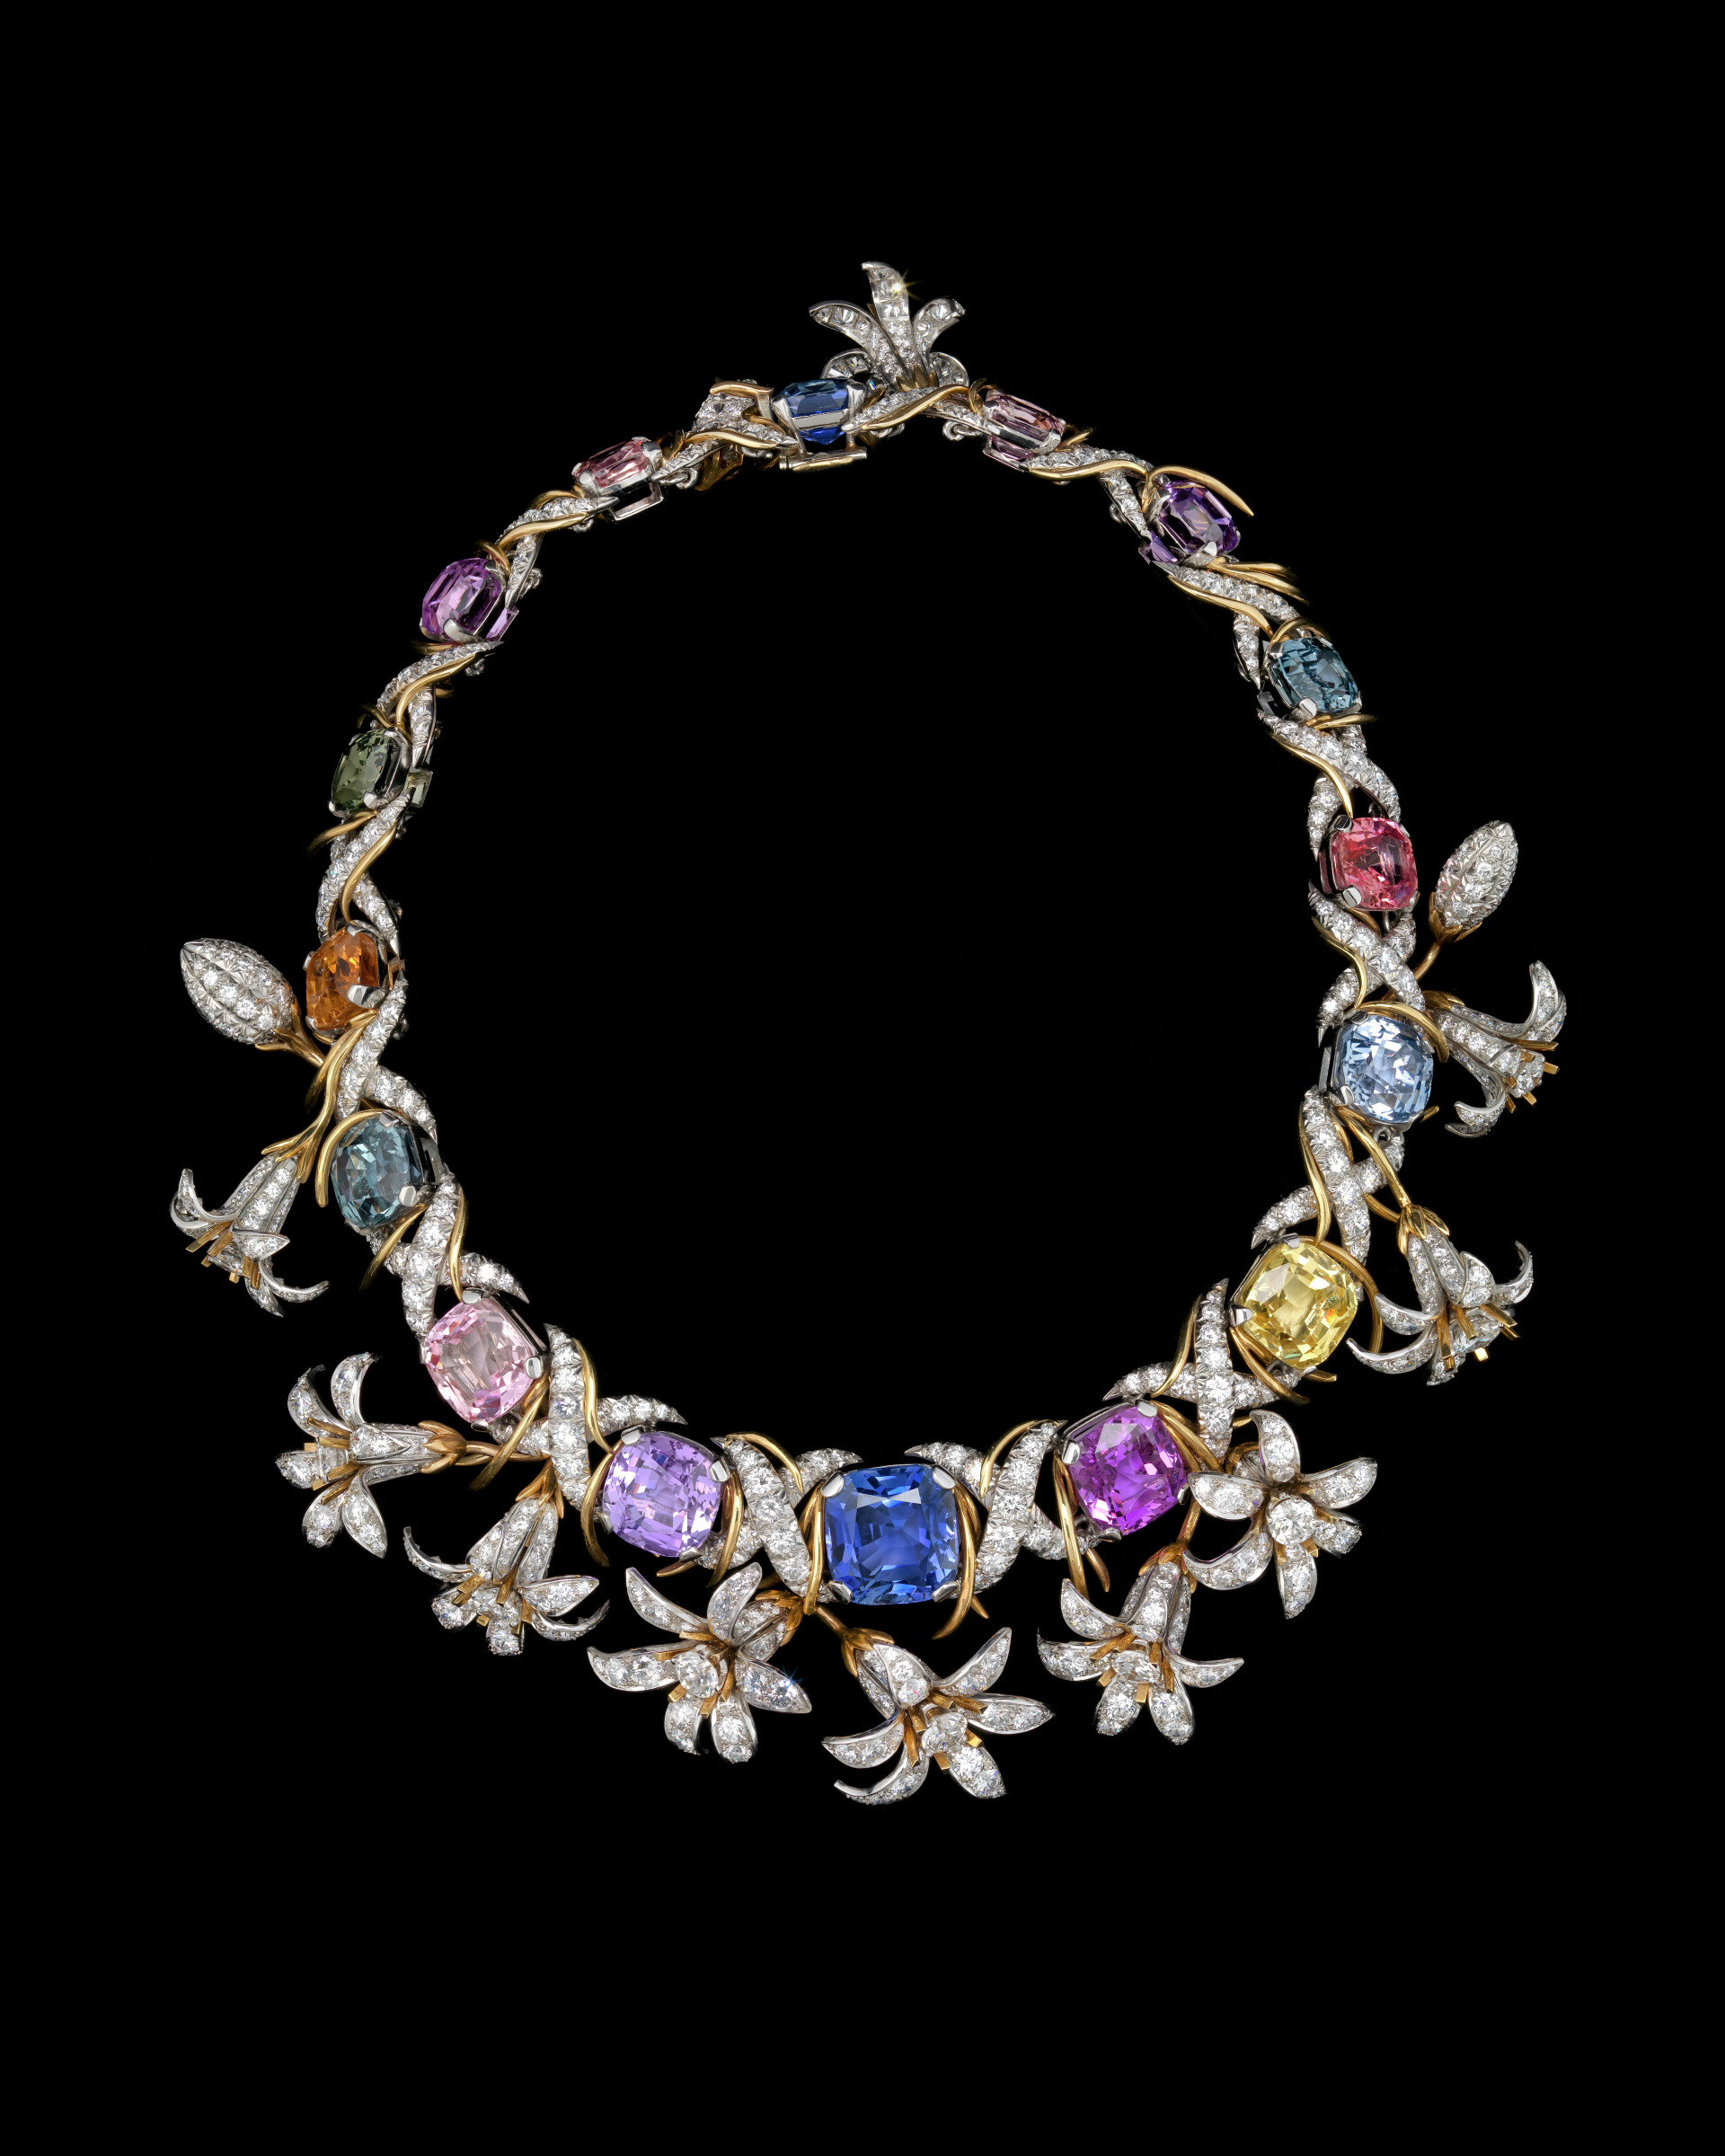 Jasmine (Breath of Spring) (Necklace), Jean Schlumberger, French, 1907 – 1987 (Designer), Tiffany and Company, American, founded 1837 (Manufacturer), 1966, model 1962, 18 karat gold, platinum, colored sapphire and diamond, Collection of Mrs. Paul Mellon